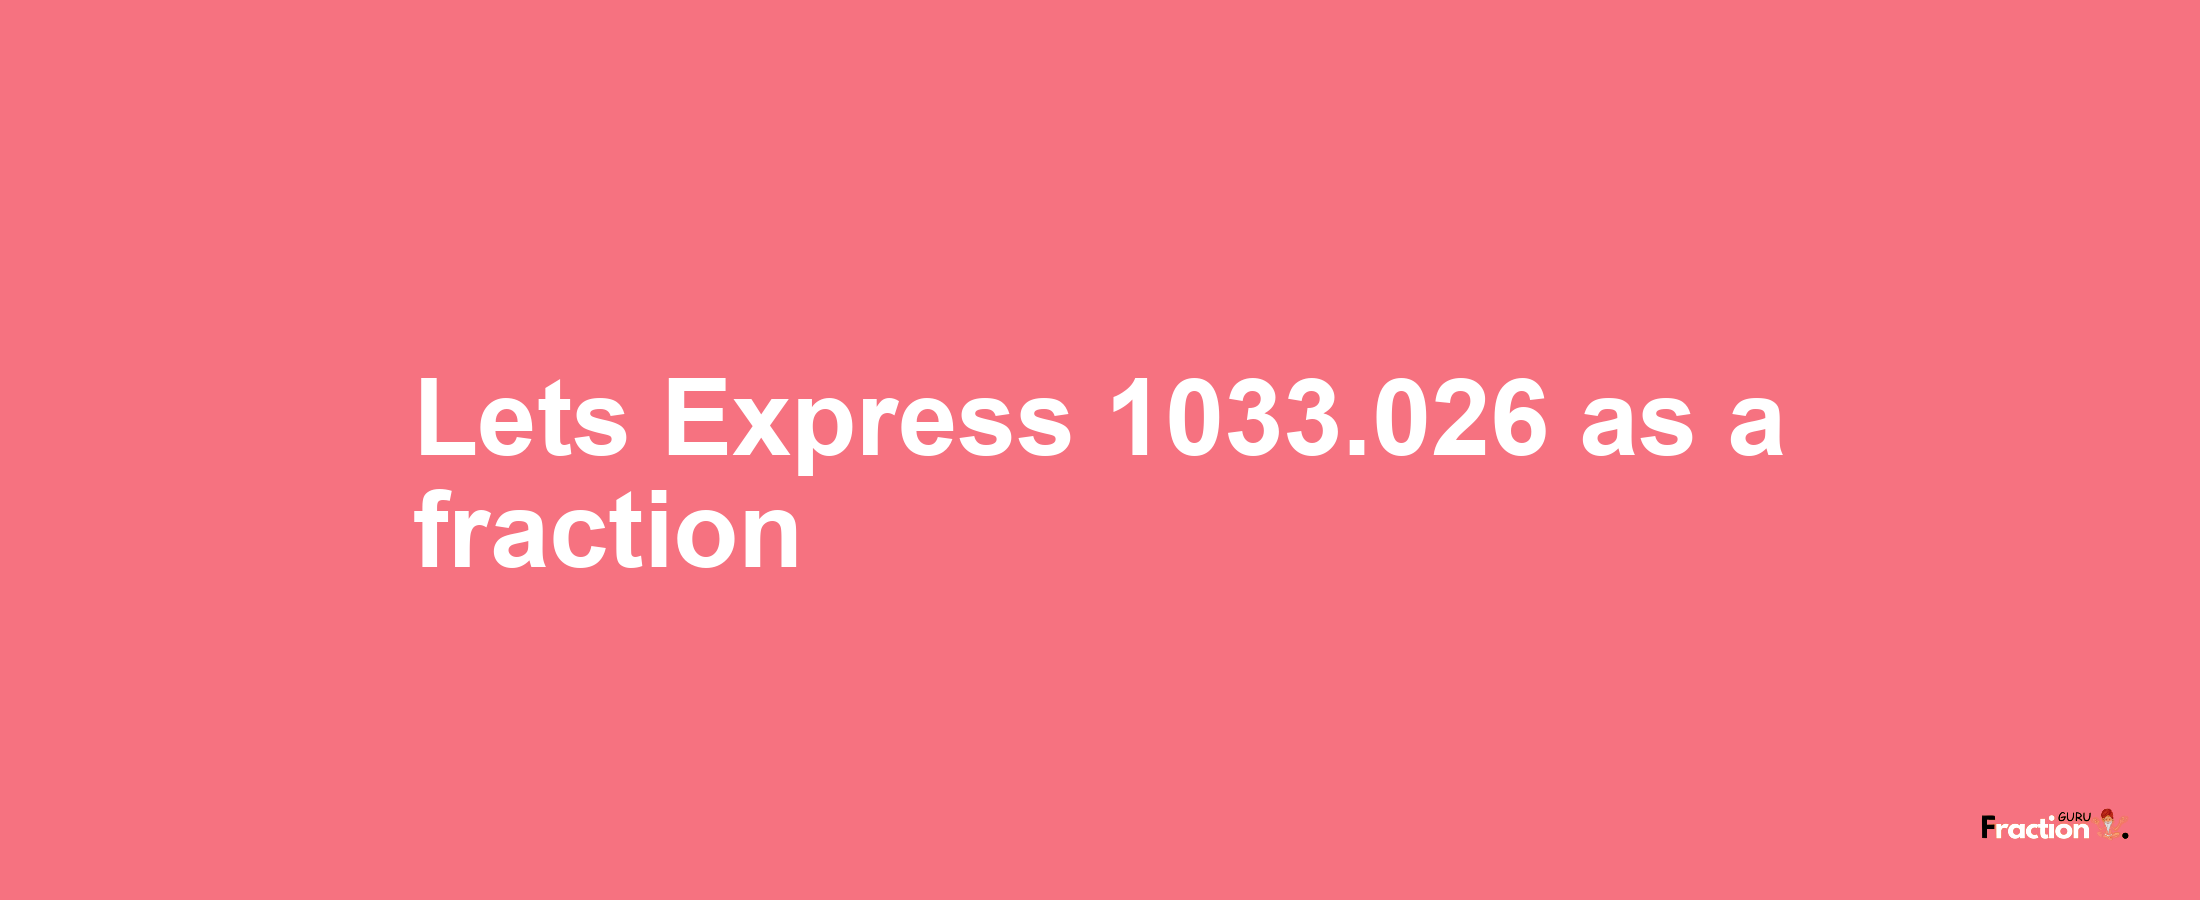 Lets Express 1033.026 as afraction